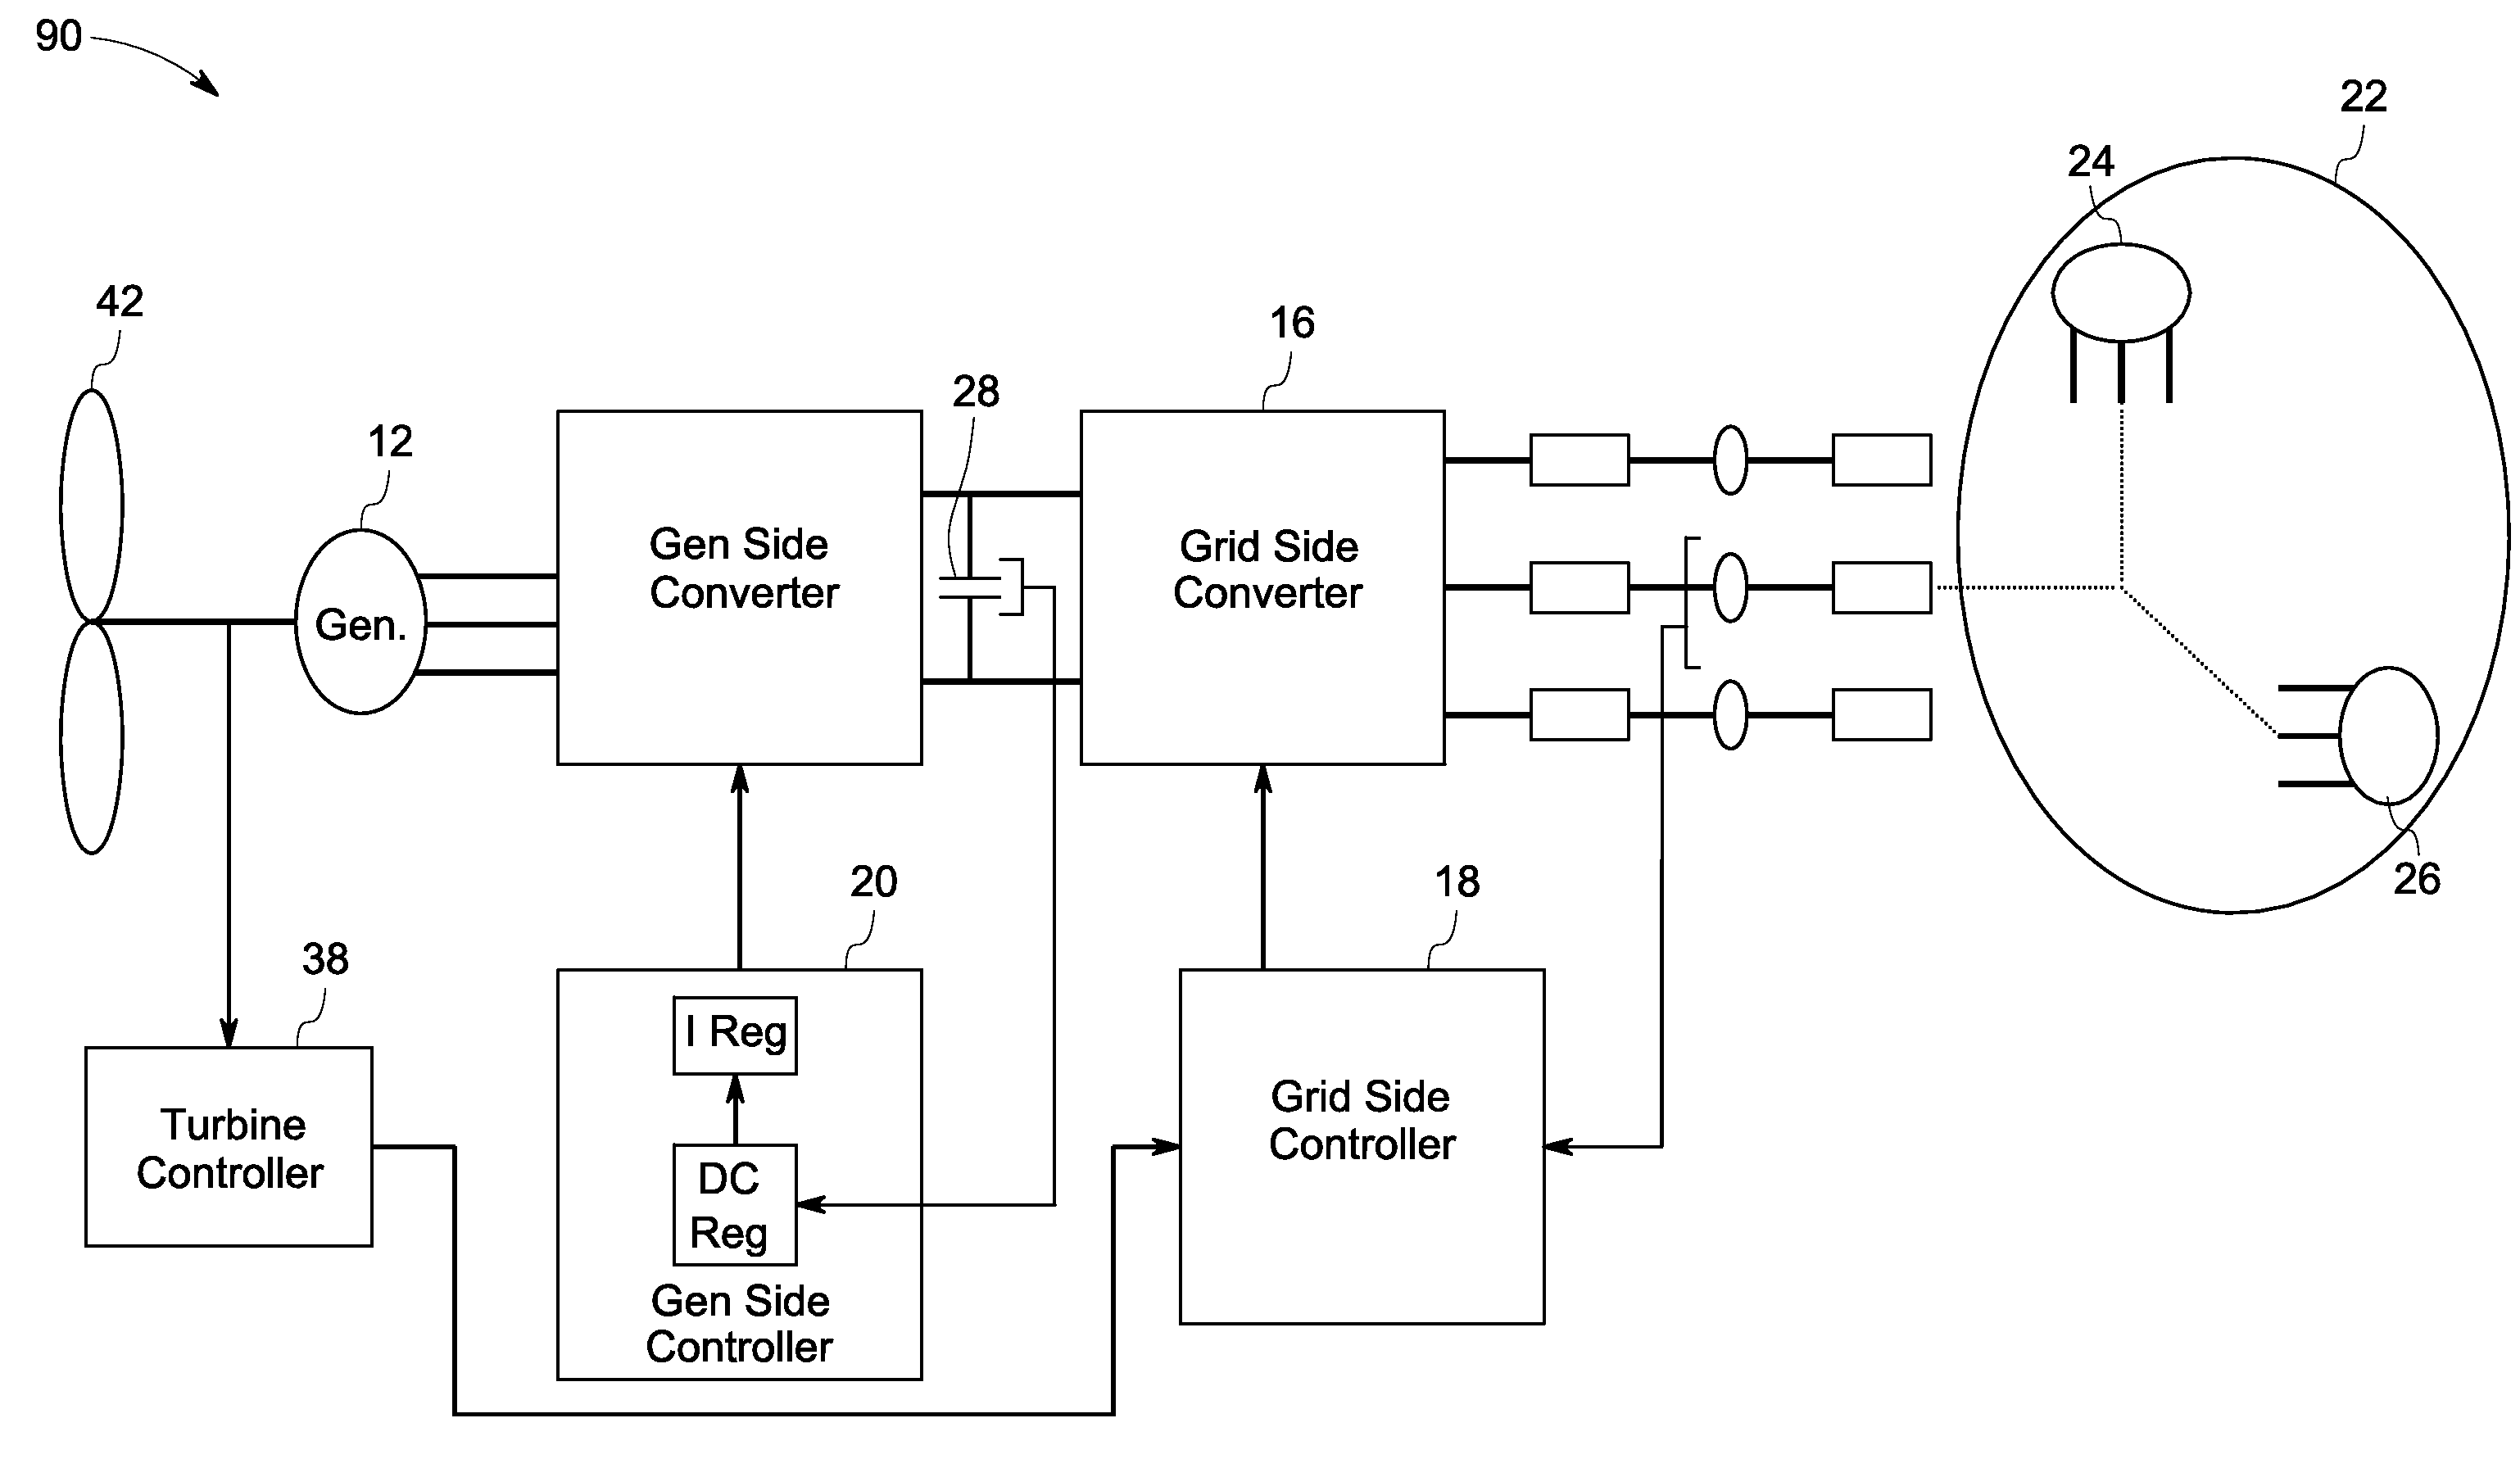 System and method for control of a grid connected power generating system